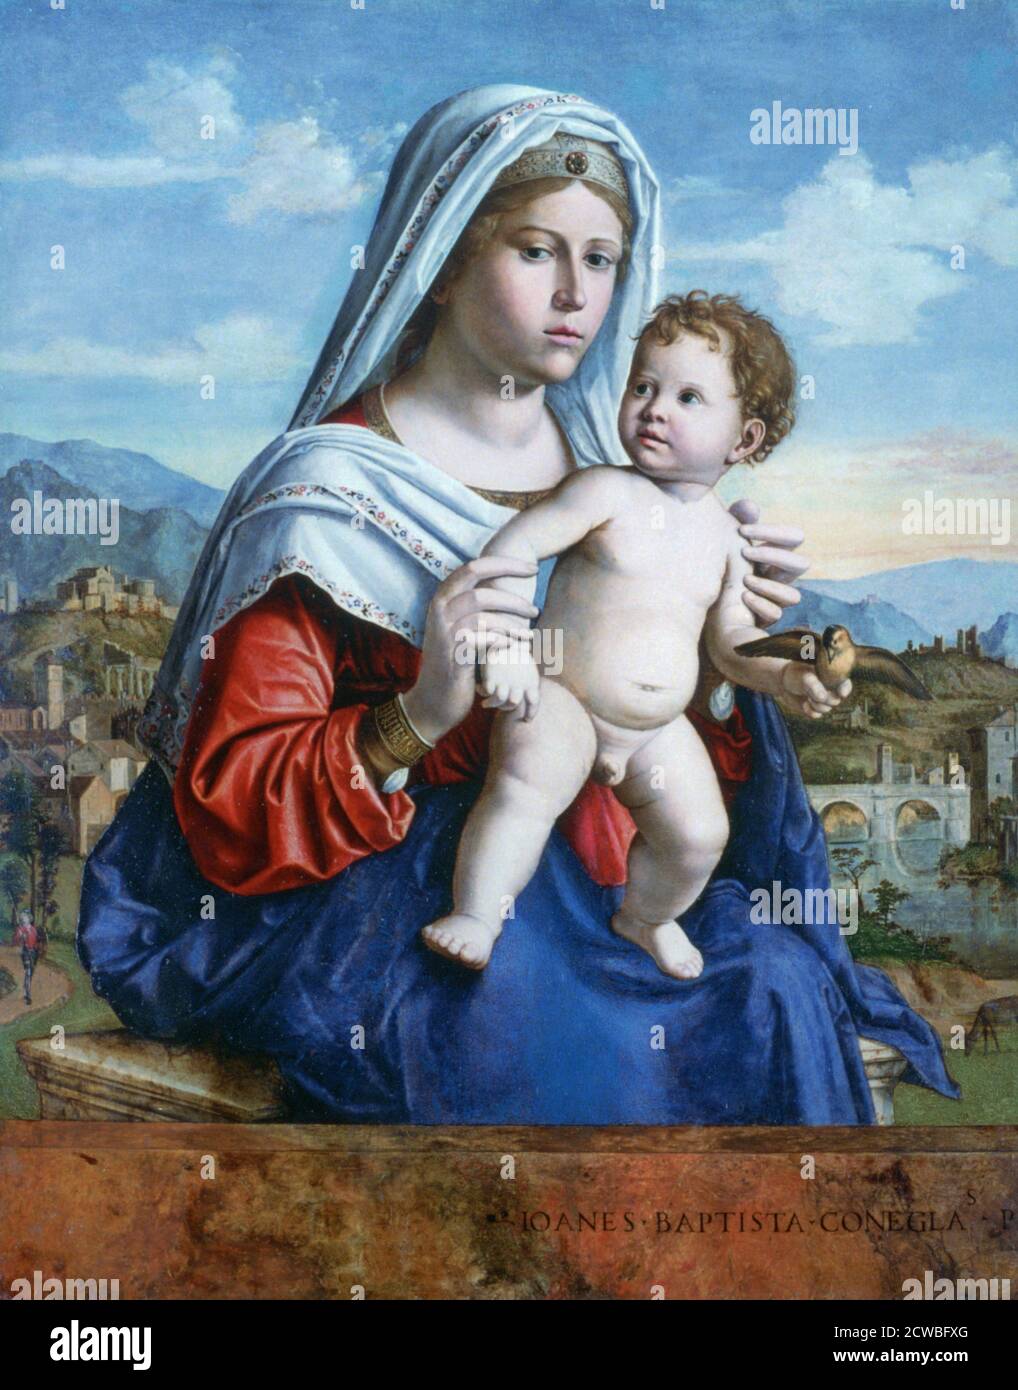 The Virgin and Child', c1505. Artist: Giovanni Battista Cima da Conegliano. Giovanni Battista Cima da Conegliano (1459-1517) was an Italian Renaissance painter who mostly worked in Venice. Stock Photo